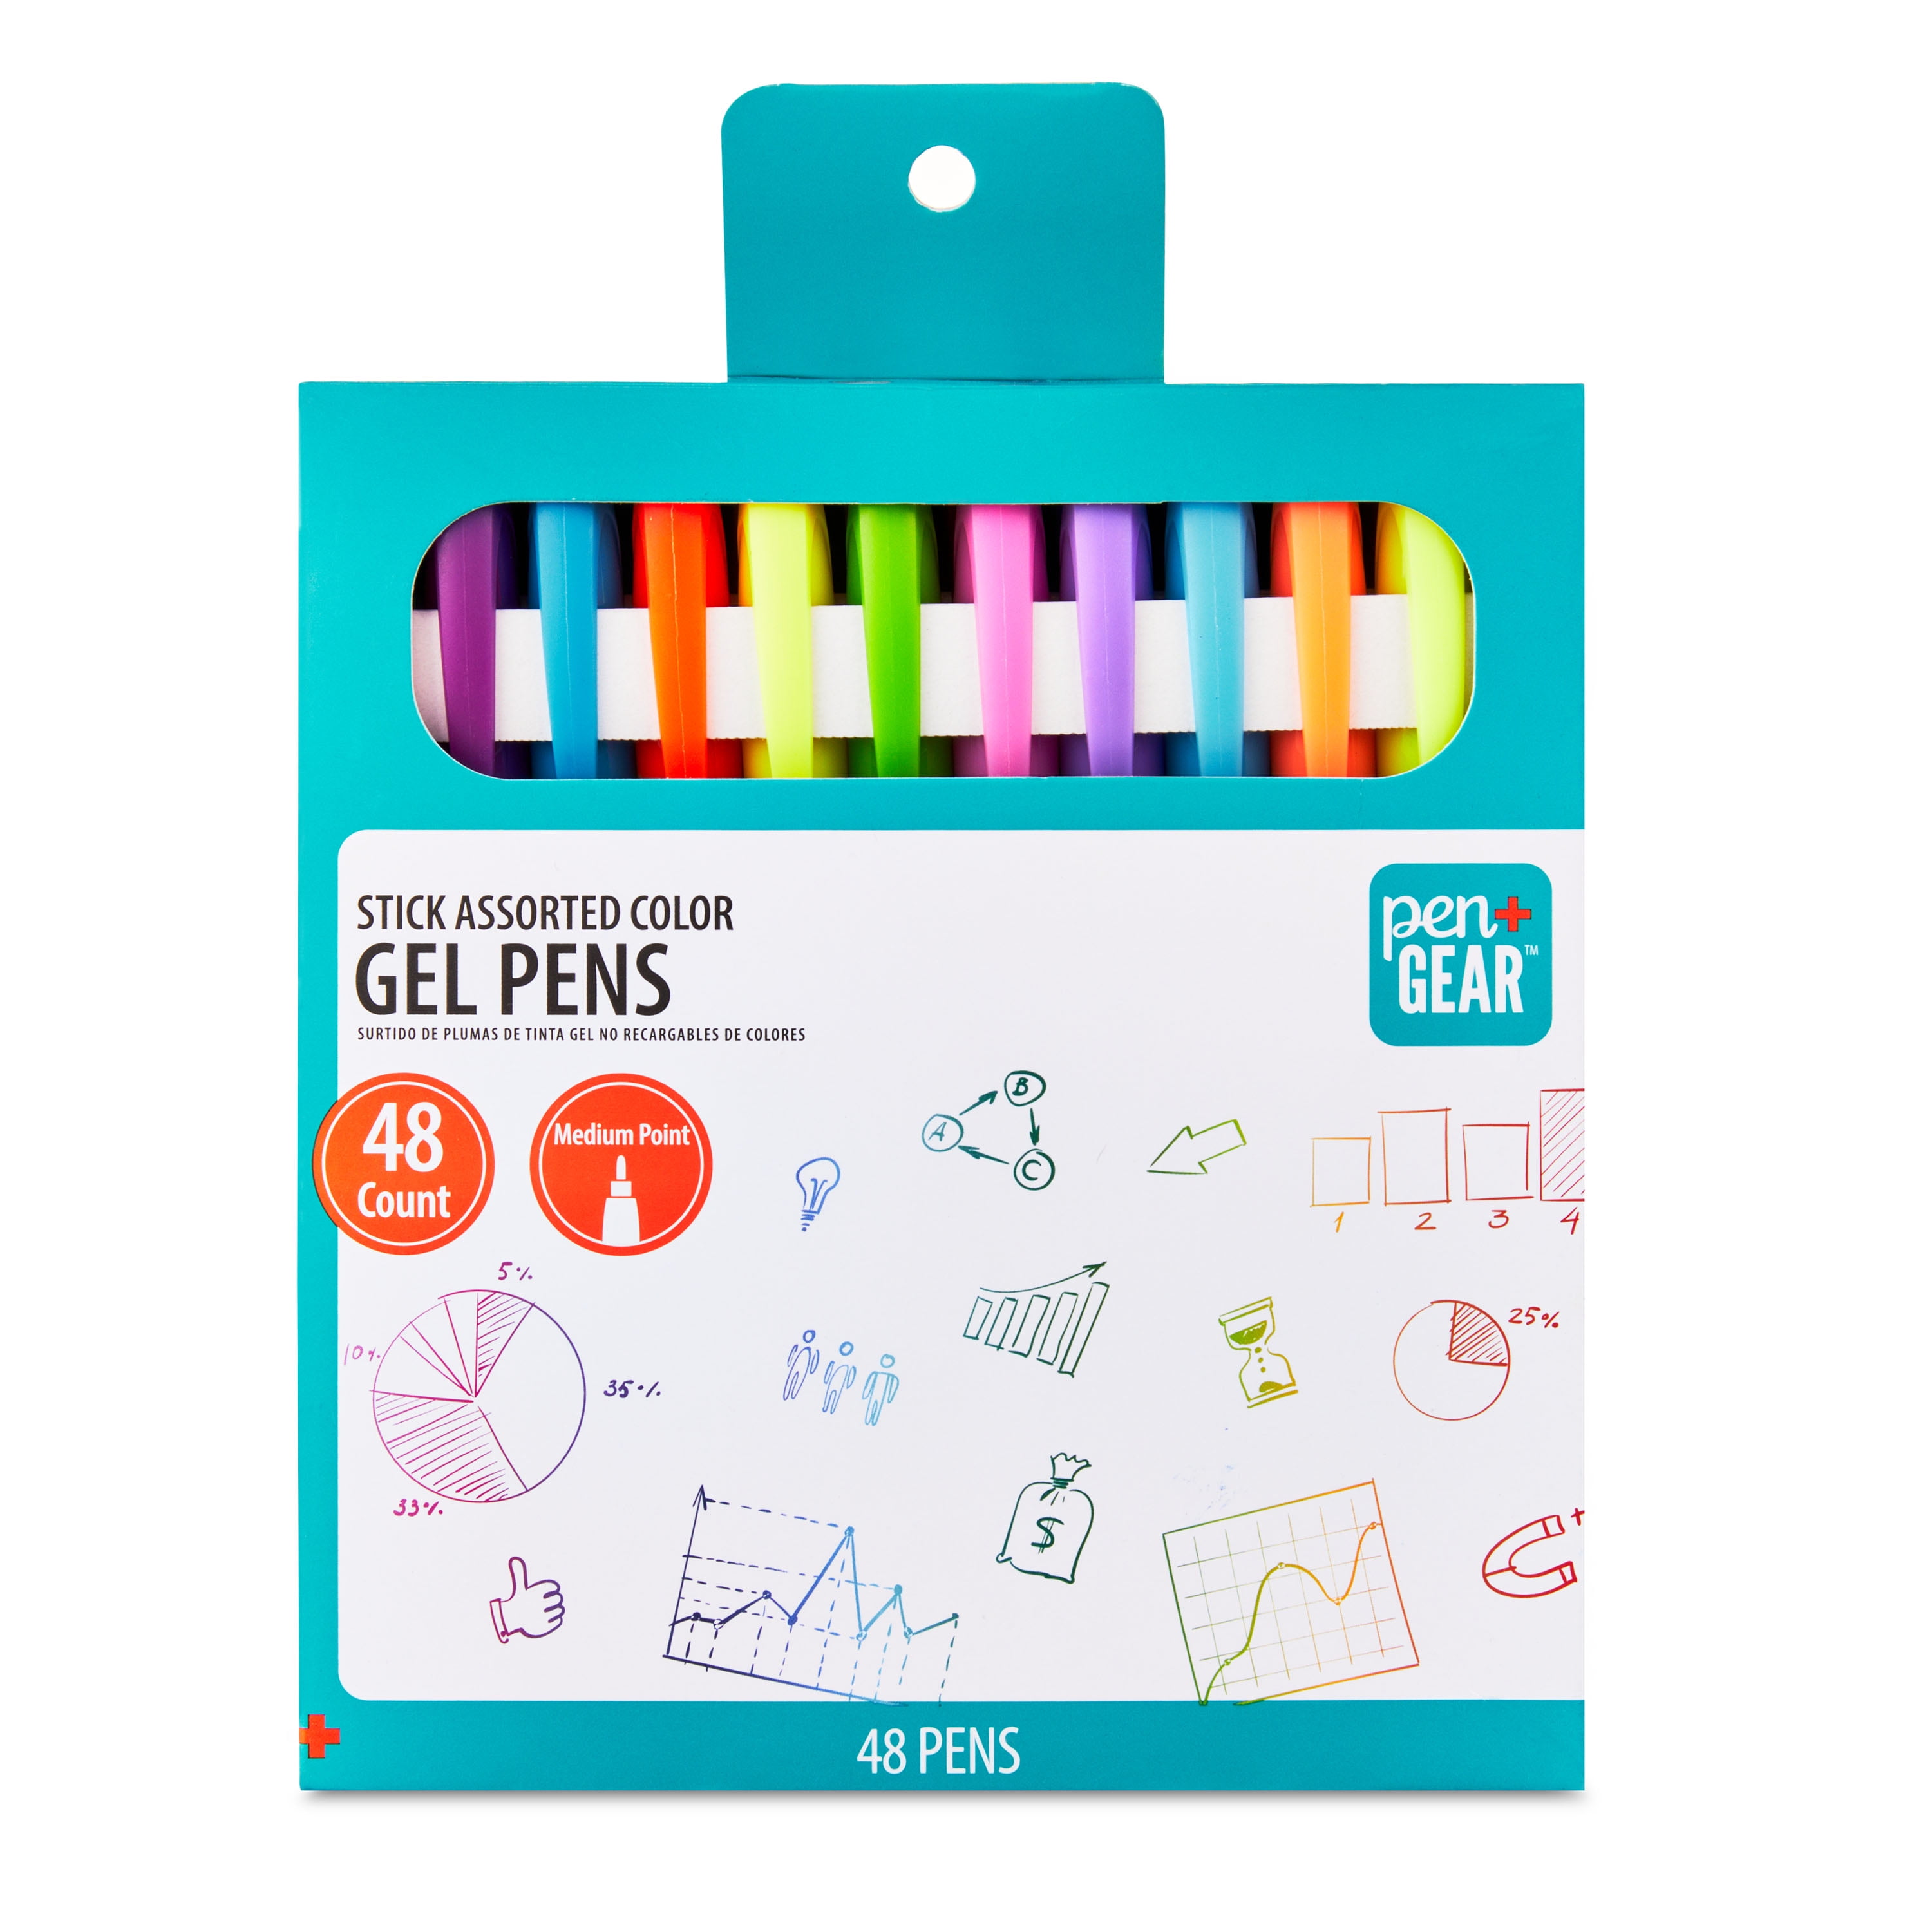 Gel Ink Pen Set with 48 Gorgeous Colors – Artist Quality Ideal For